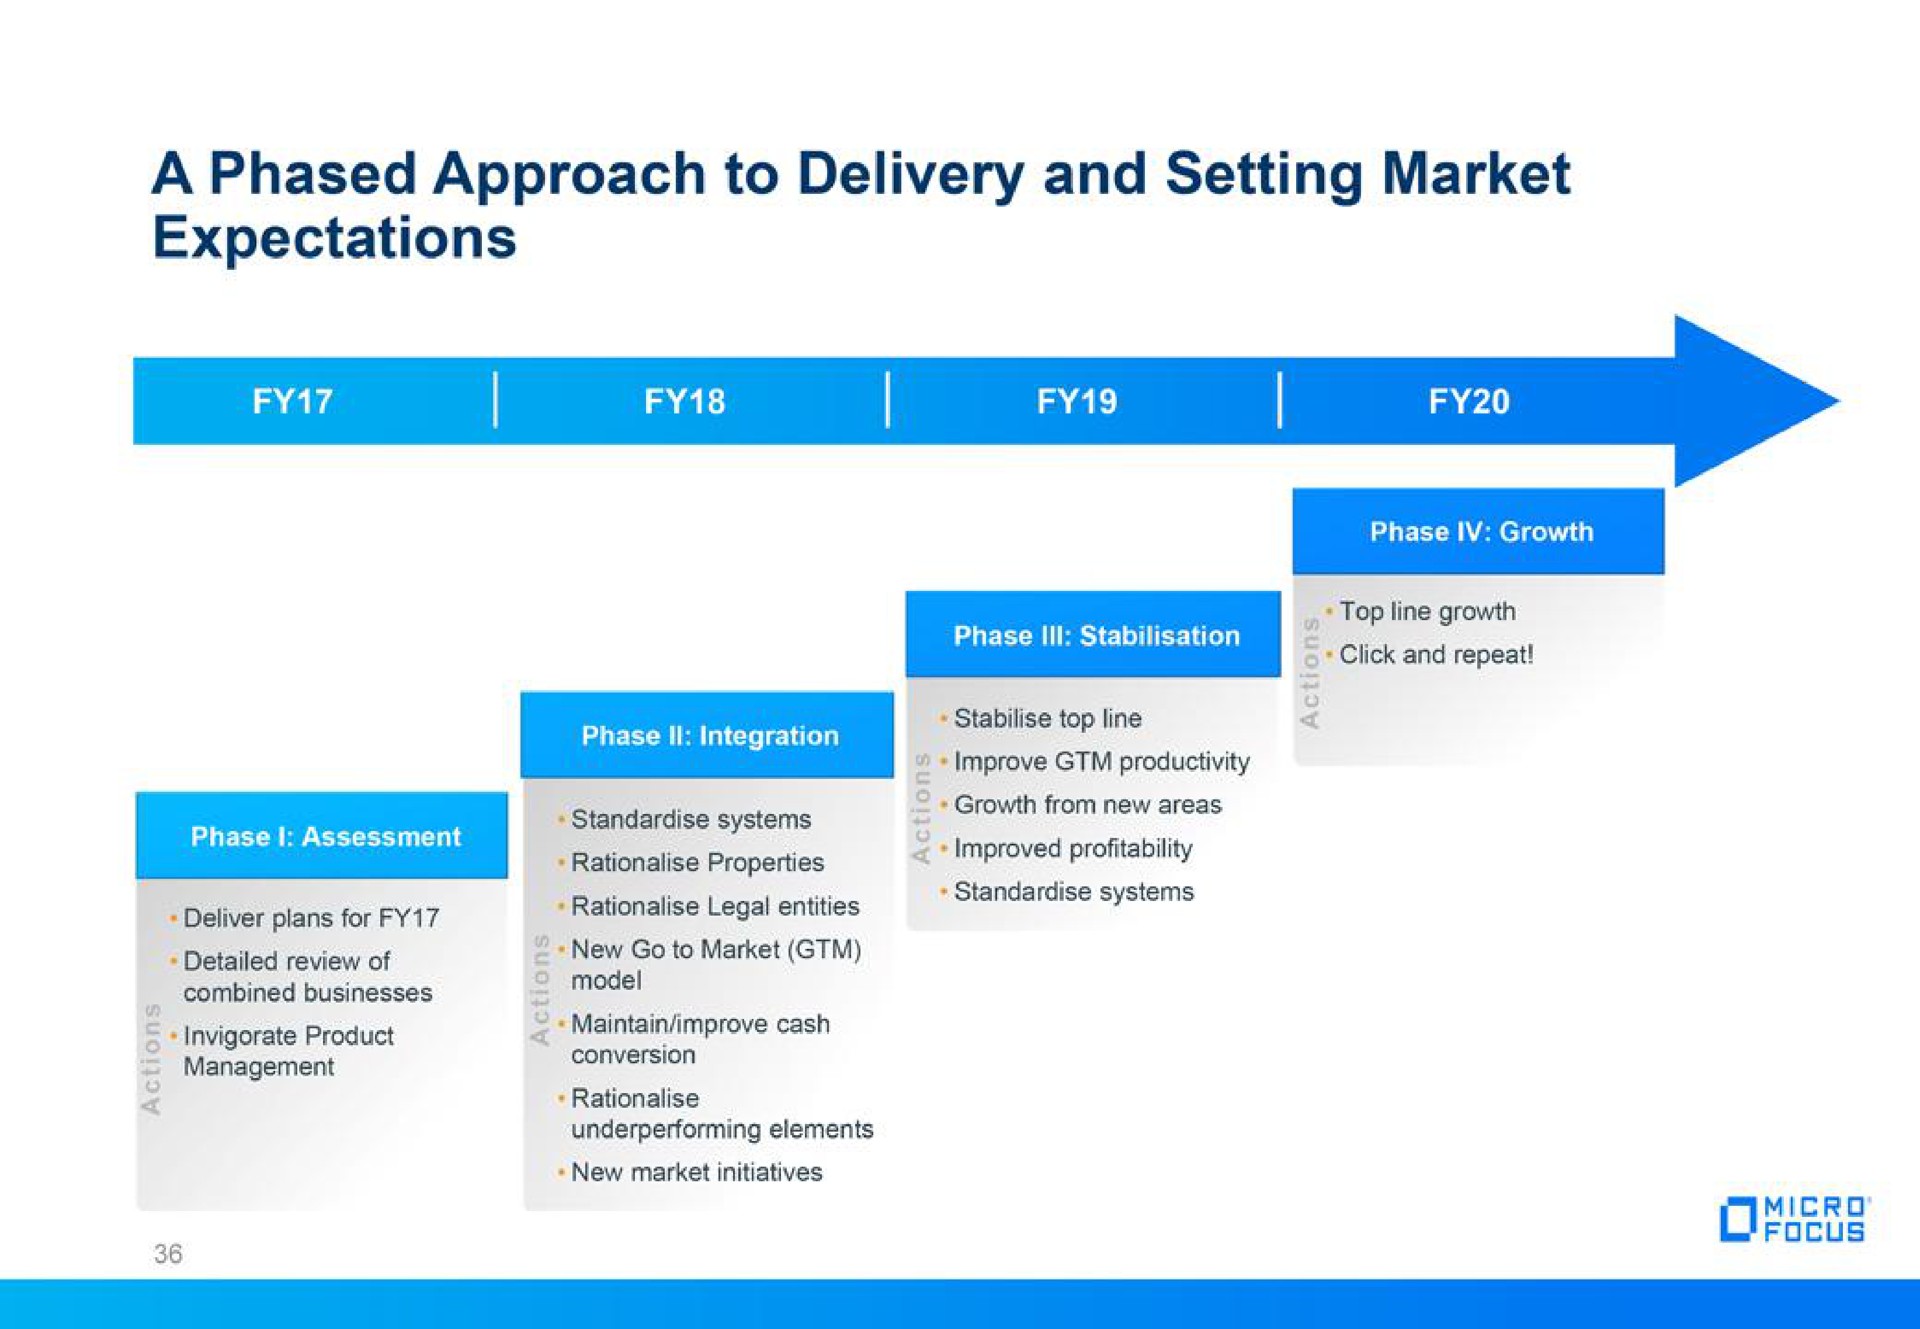 a phased approach to delivery and setting market expectations | Micro Focus